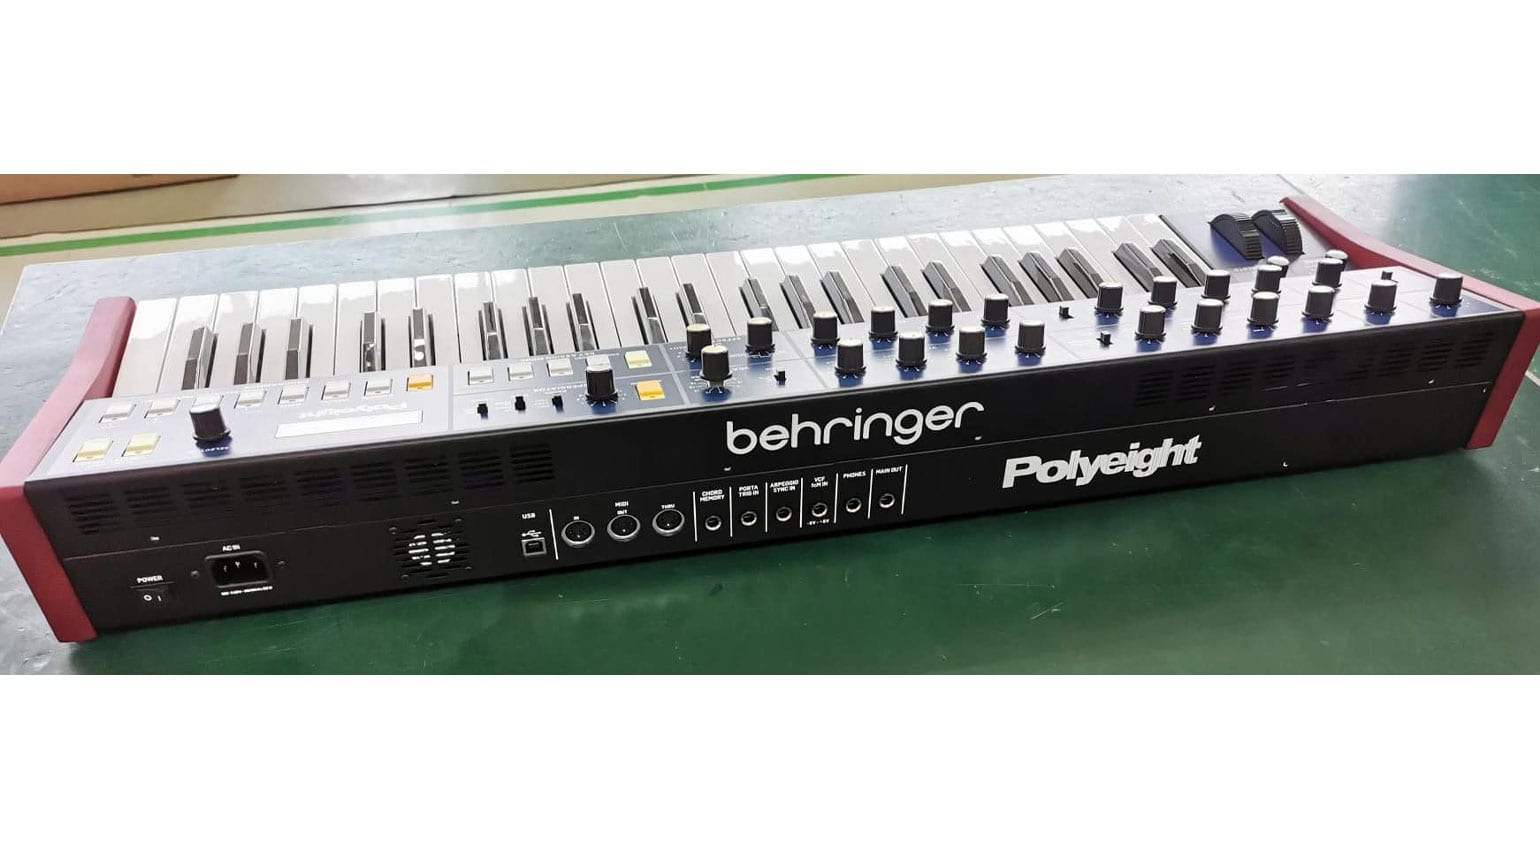 Behringer Polyeight